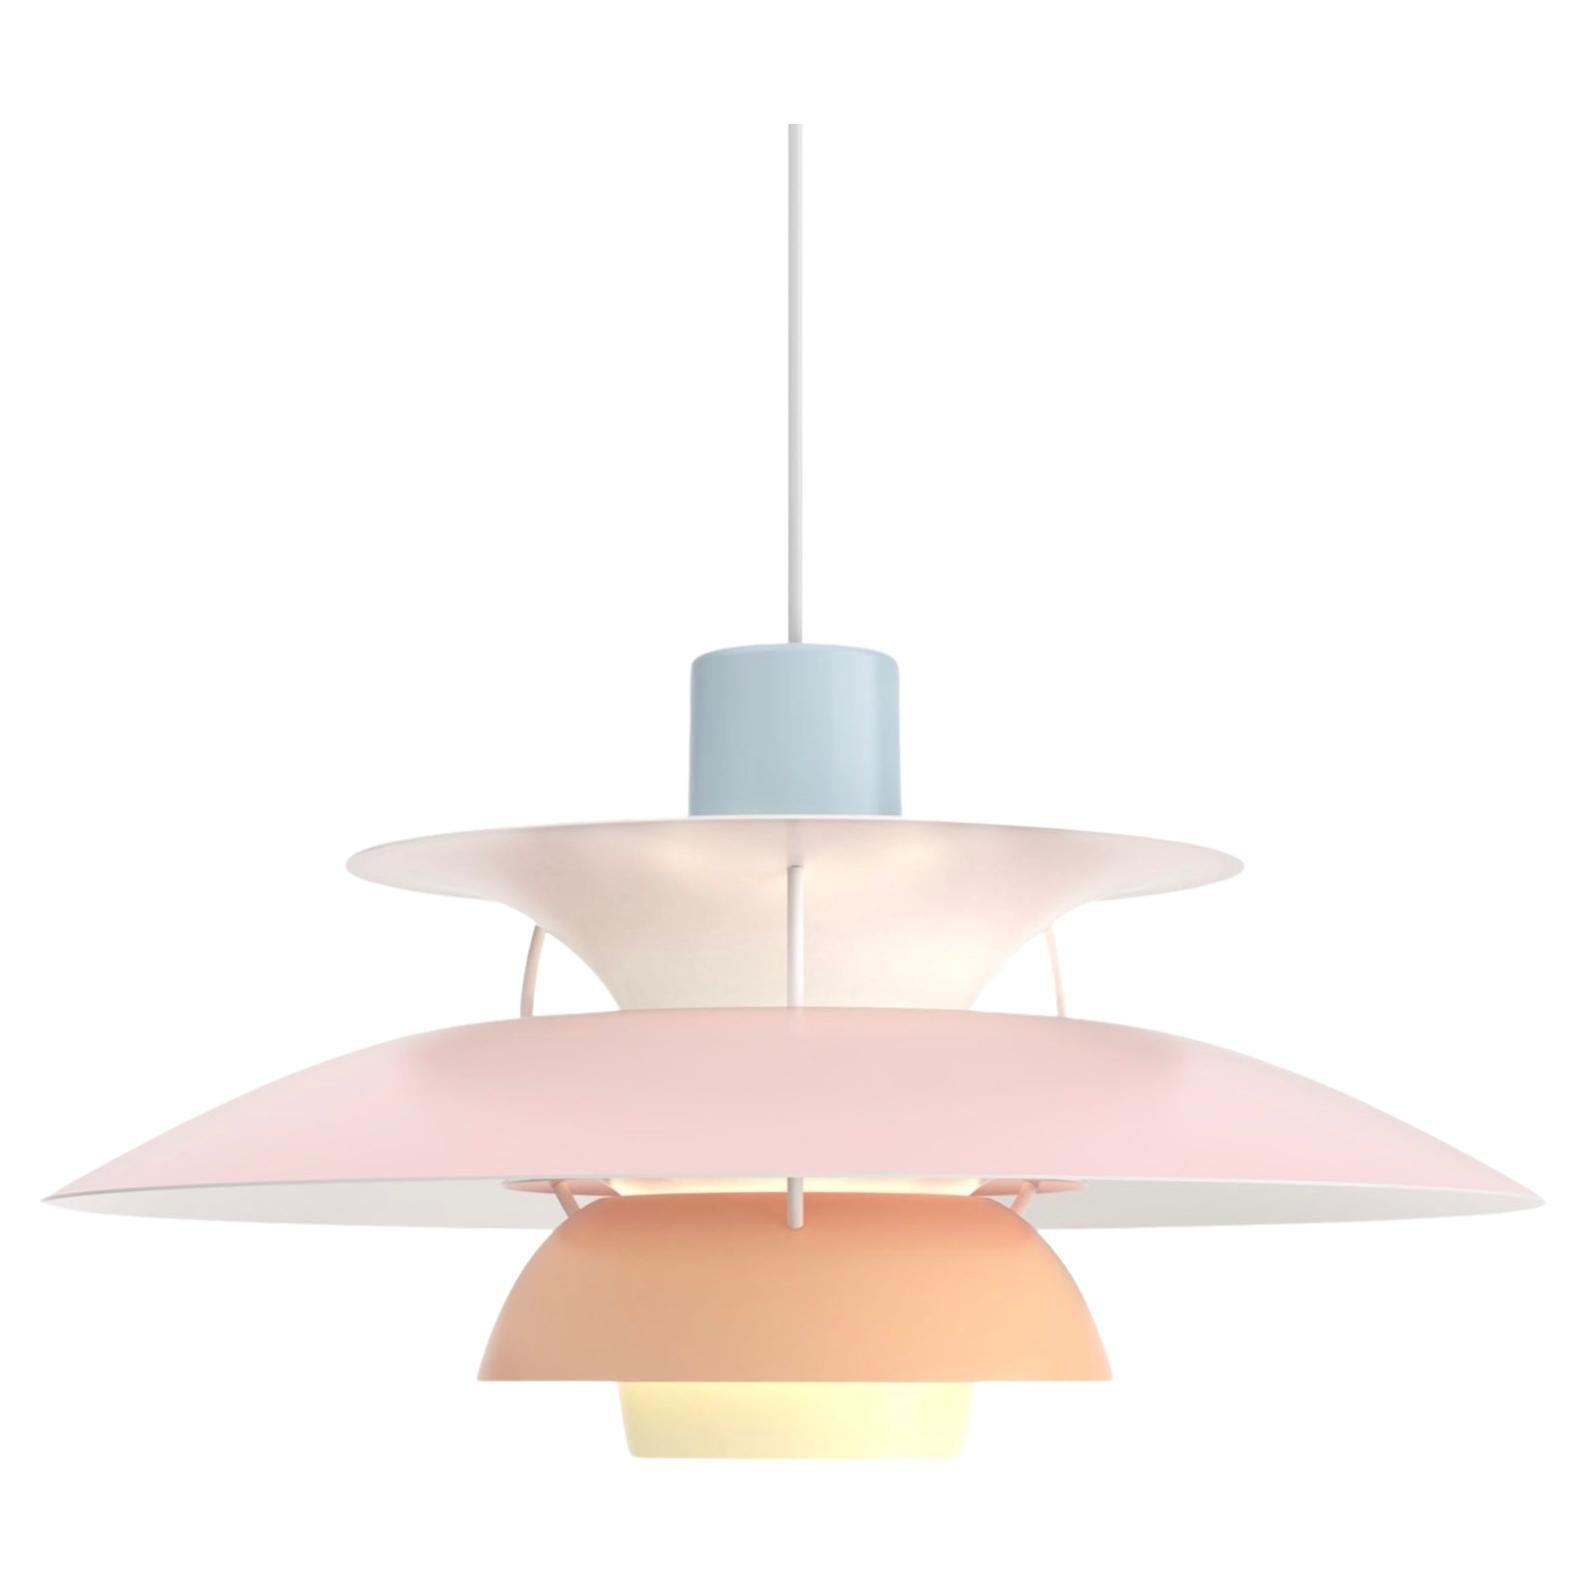 Poul Henningsen PH5 Pendant in Pastel Blue Pink and Peach for Louis Poulsen